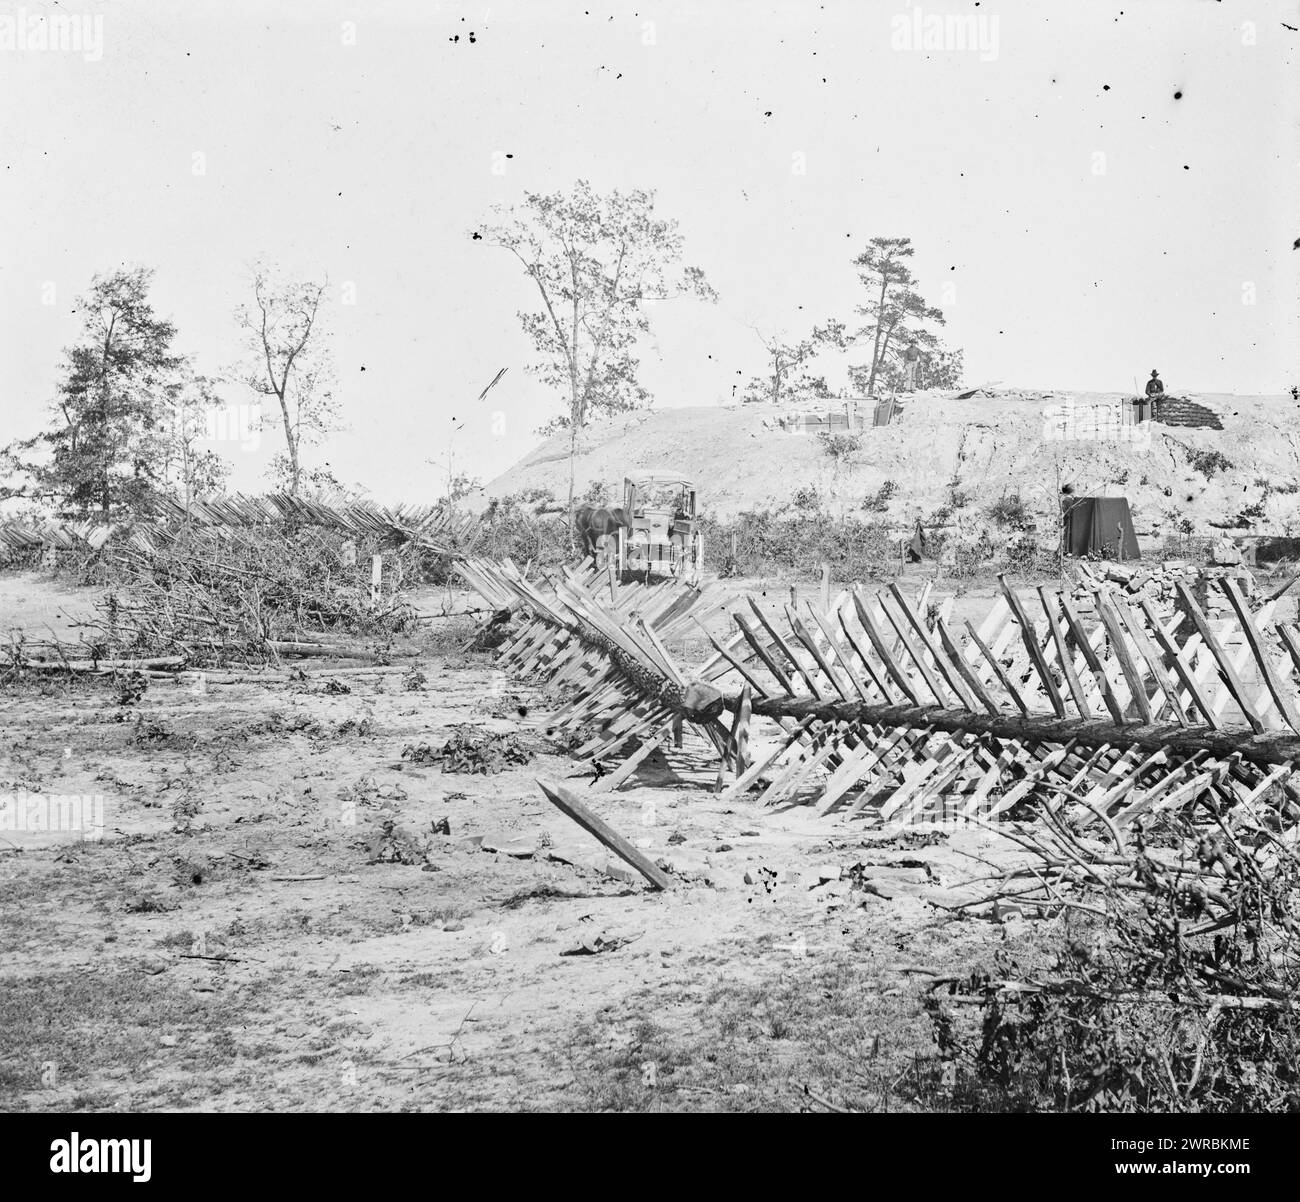 Atlanta, Georgia. Confederate fortifications. (shown is Barnard's wagon and portable darkroom), Barnard, George N., 1819-1902, photographer, 1864., United States, History, Civil War, 1861-1865, Glass negatives, 1860-1870., Stereographs, 1860-1870, Glass negatives, 1860-1870, 1 negative (2 plates): glass, stereograph, wet collodion Stock Photo